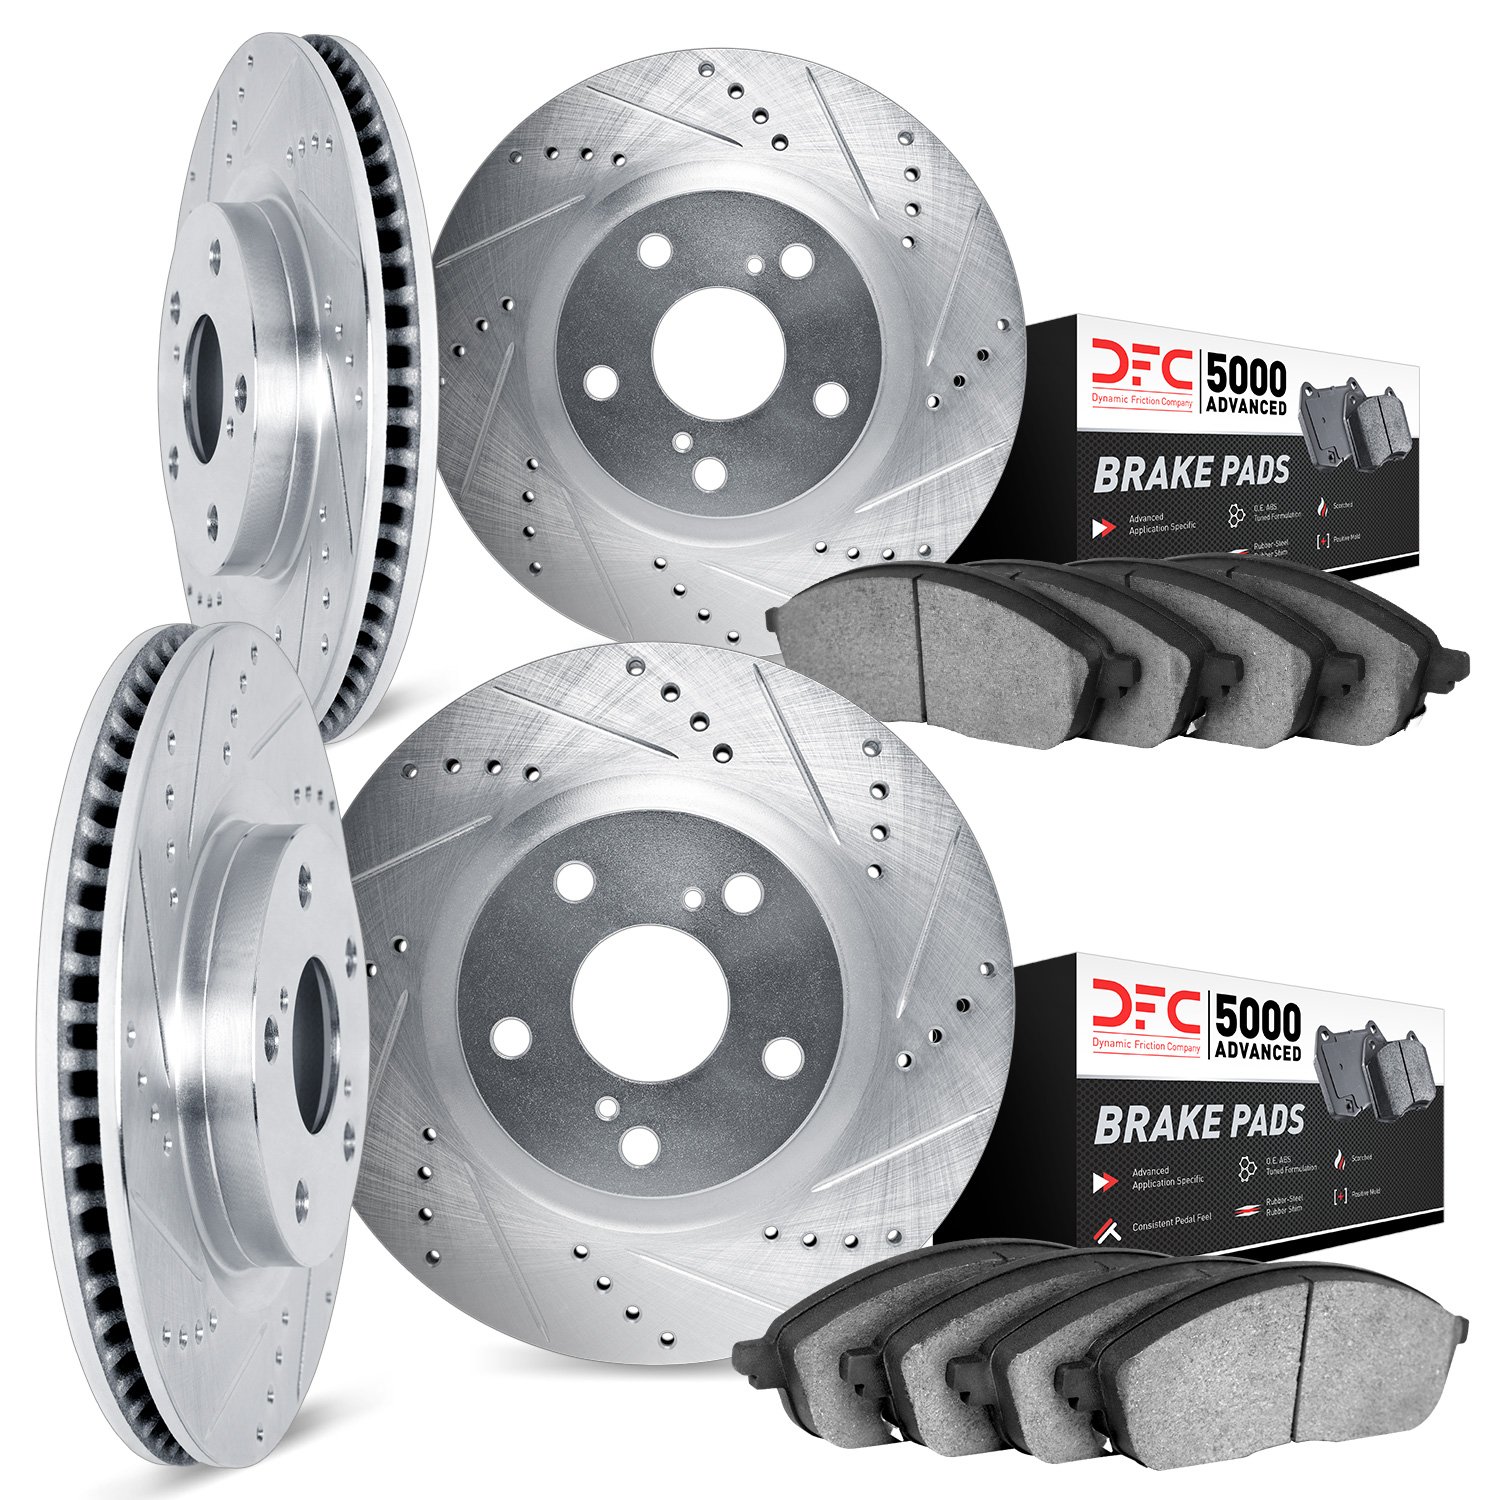 7504-80049 Drilled/Slotted Brake Rotors w/5000 Advanced Brake Pads Kit [Silver], 2007-2015 Ford/Lincoln/Mercury/Mazda, Position: